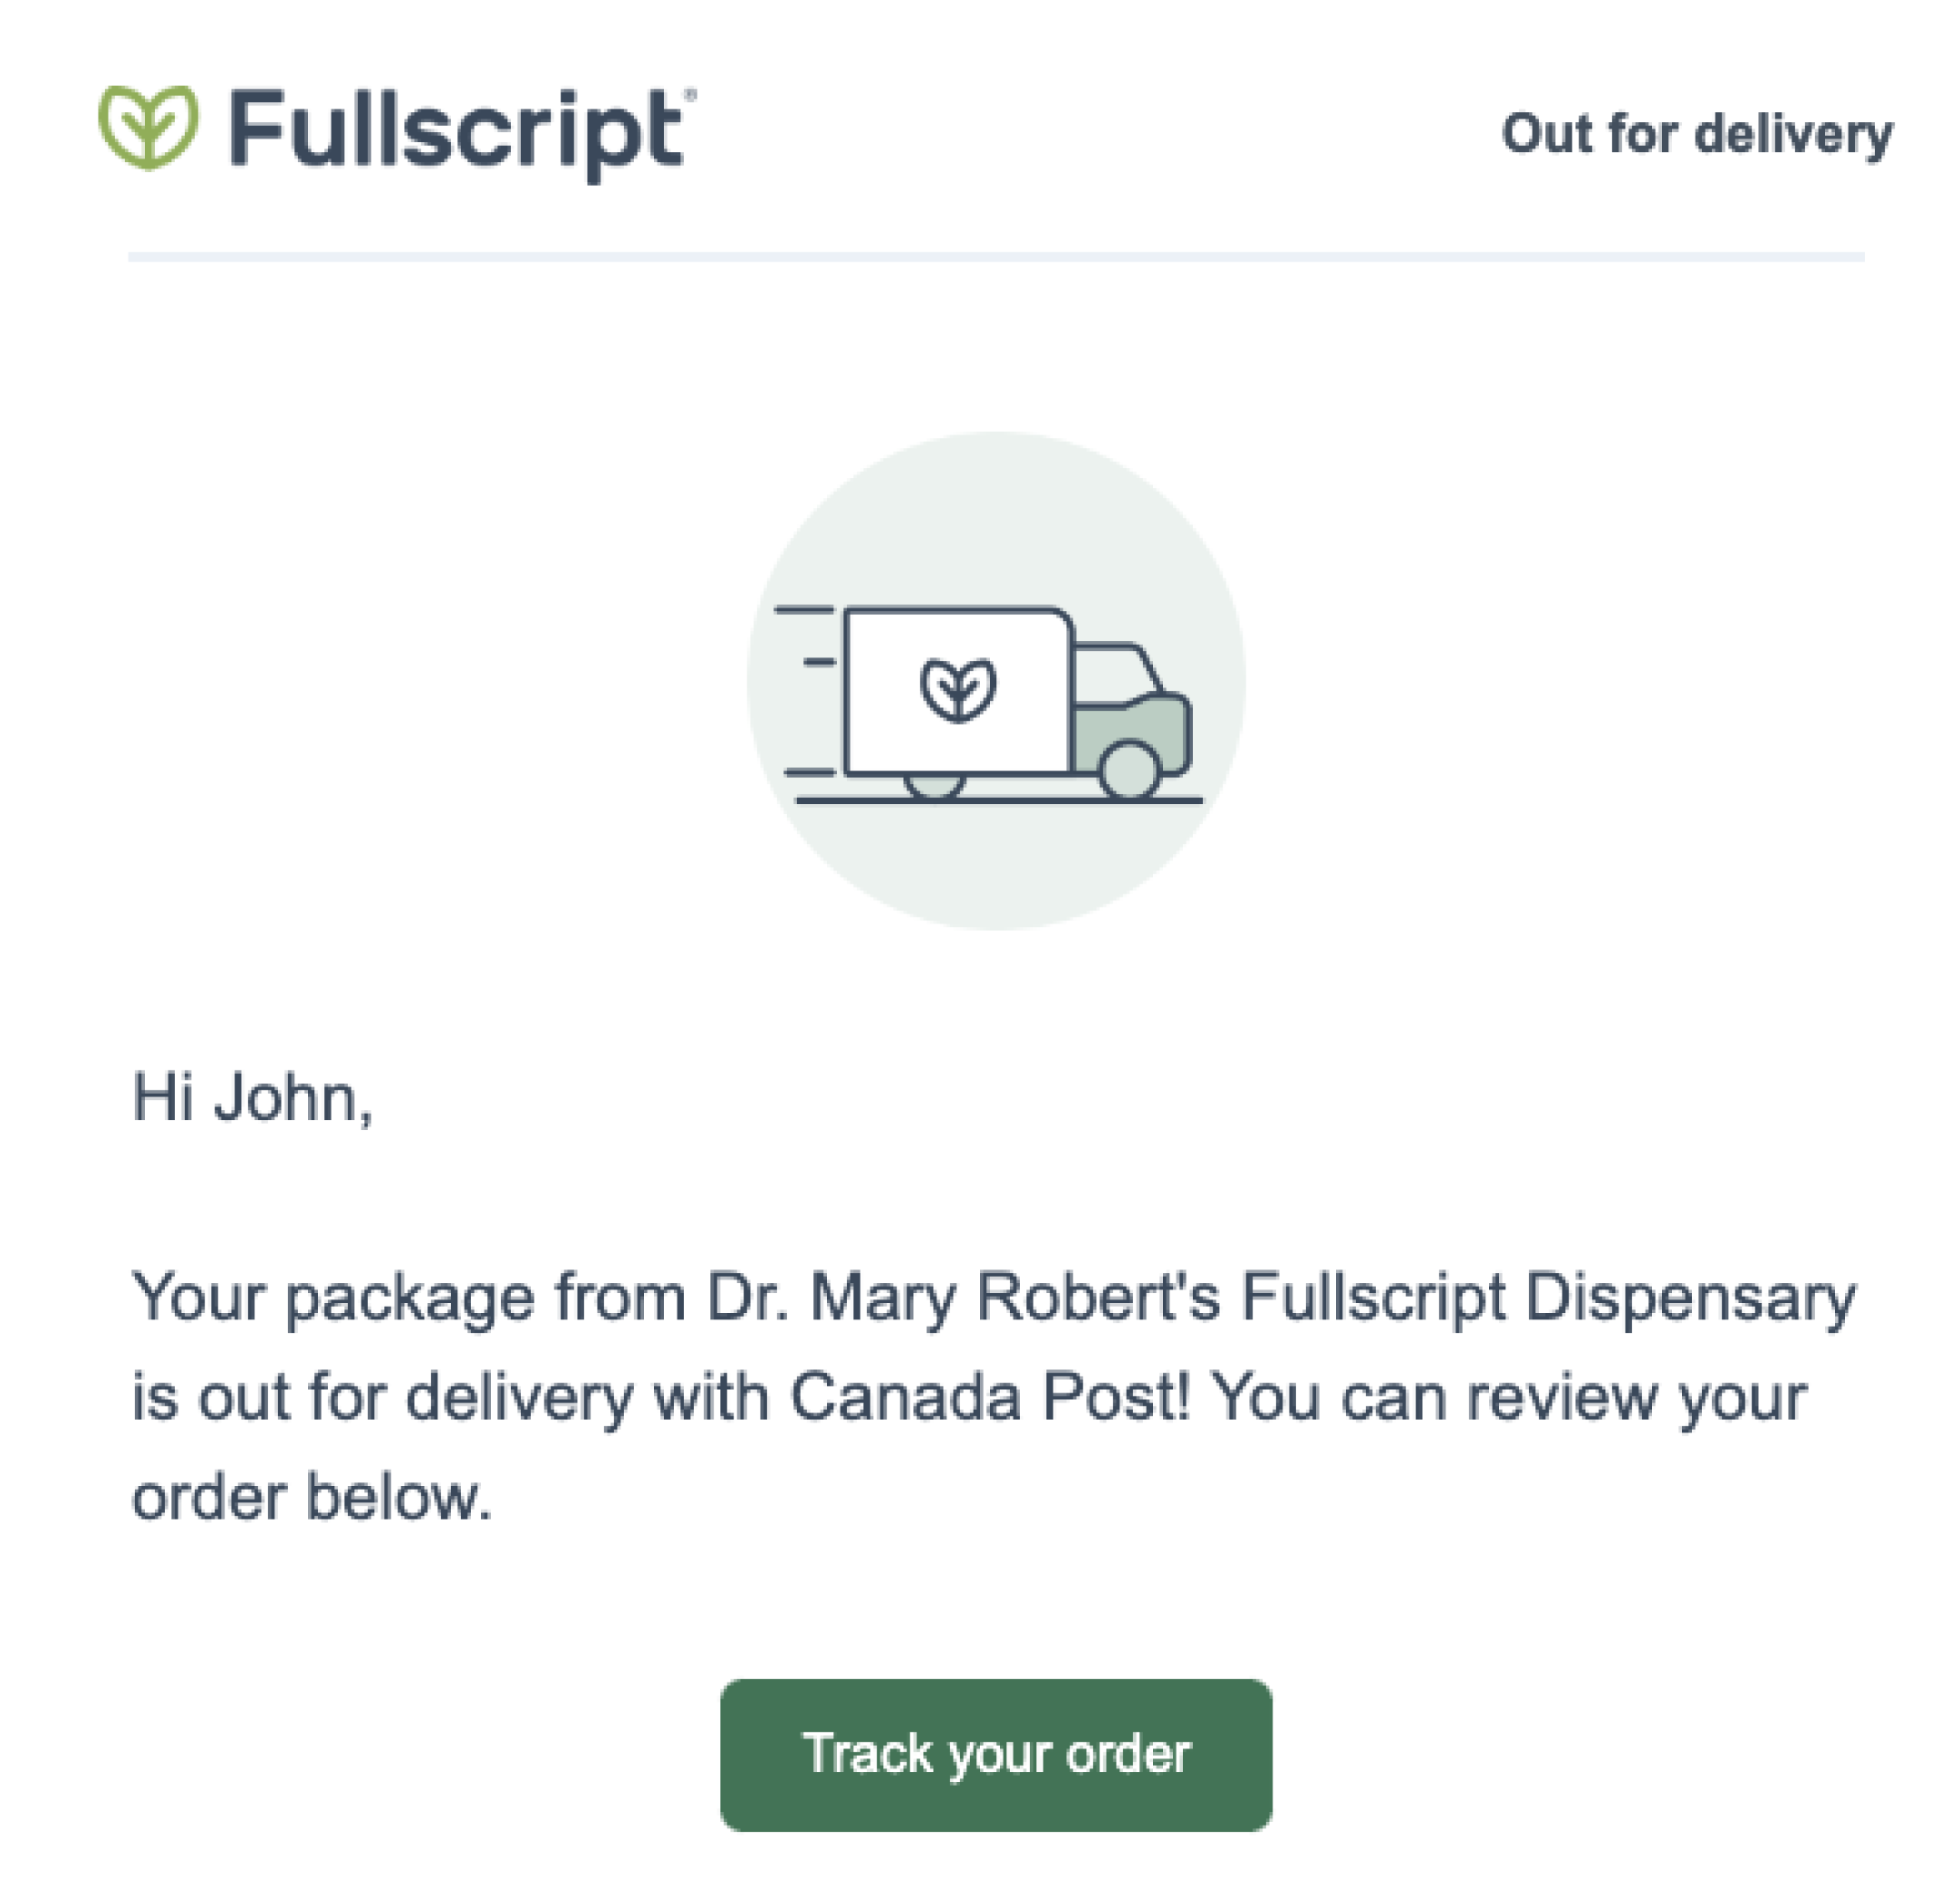 An autoship out for delivery email